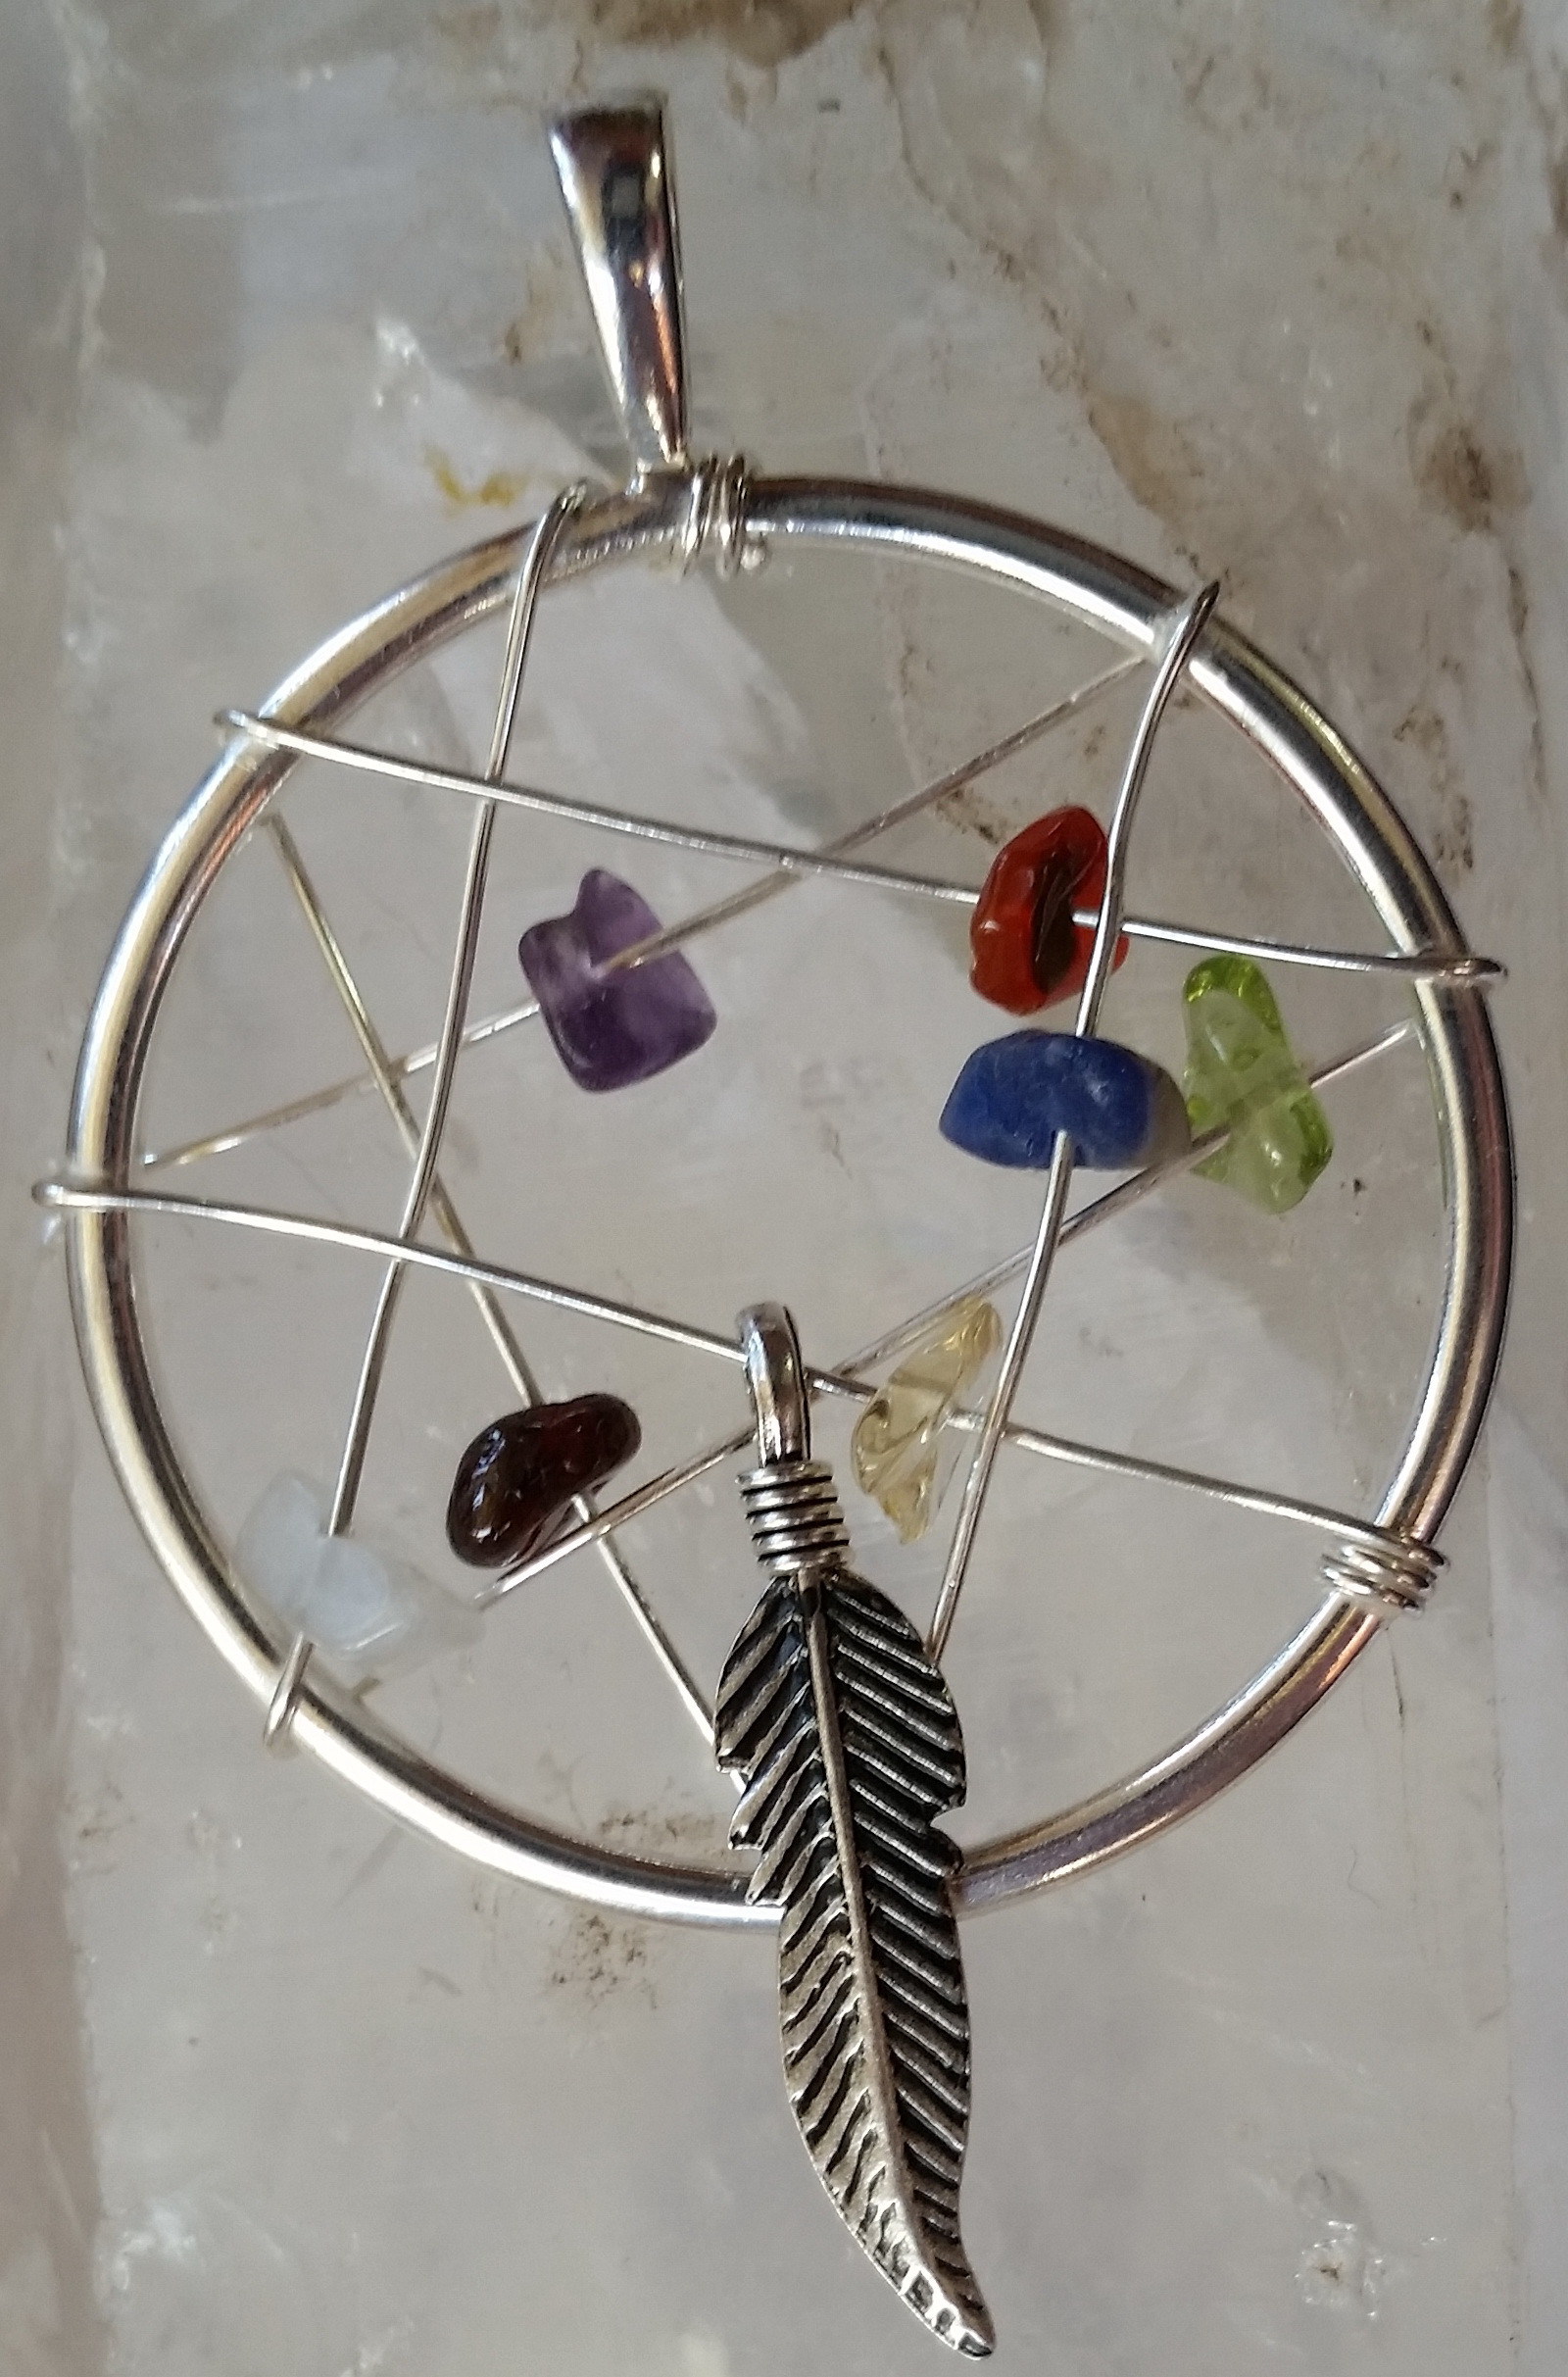 P655 Dream catcher pendant in sterling silver with genuine chip gemstones